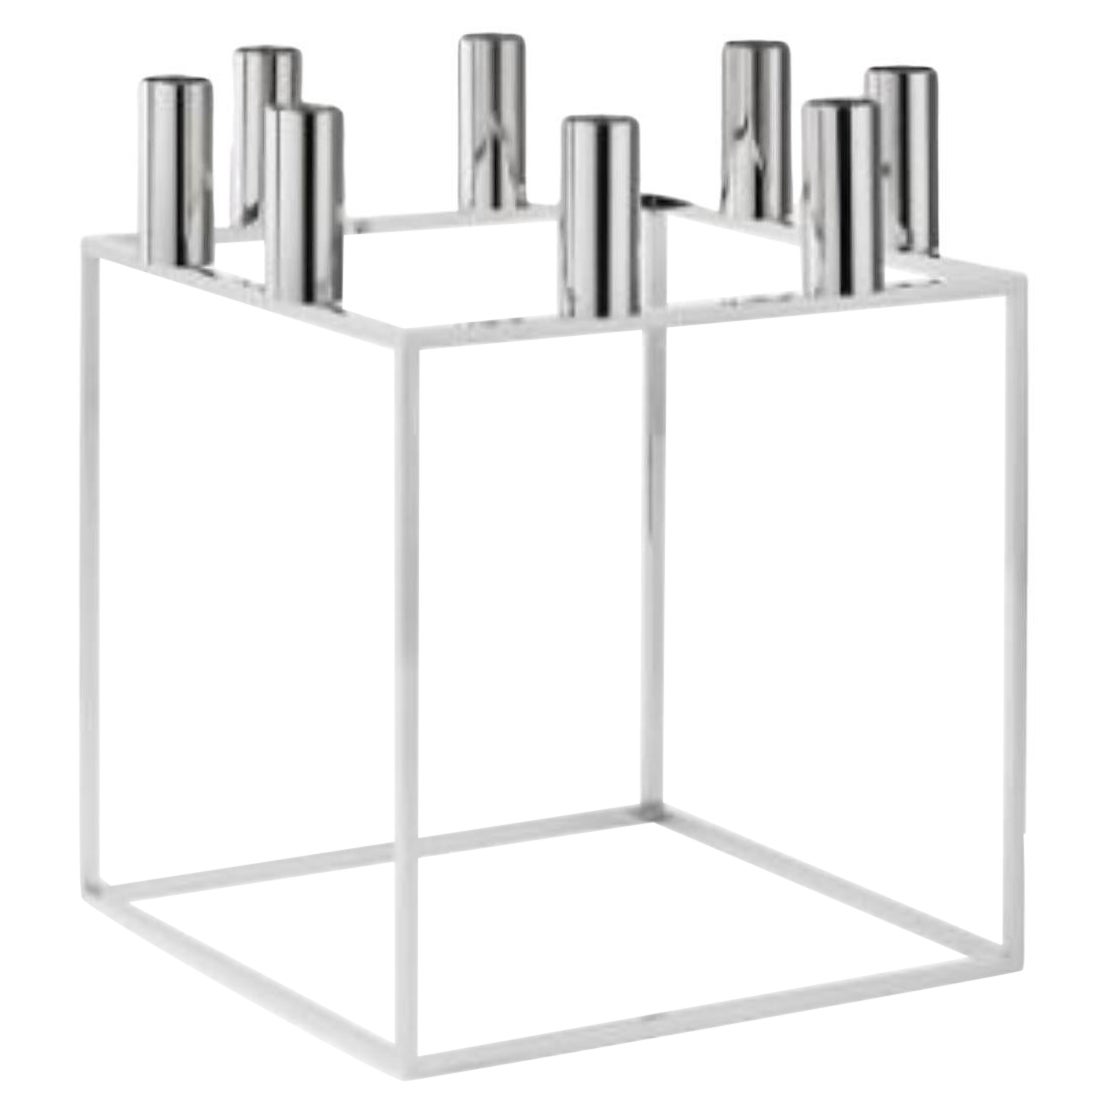 Nickel Plated Kubus 8 Candle Holder by Lassen For Sale